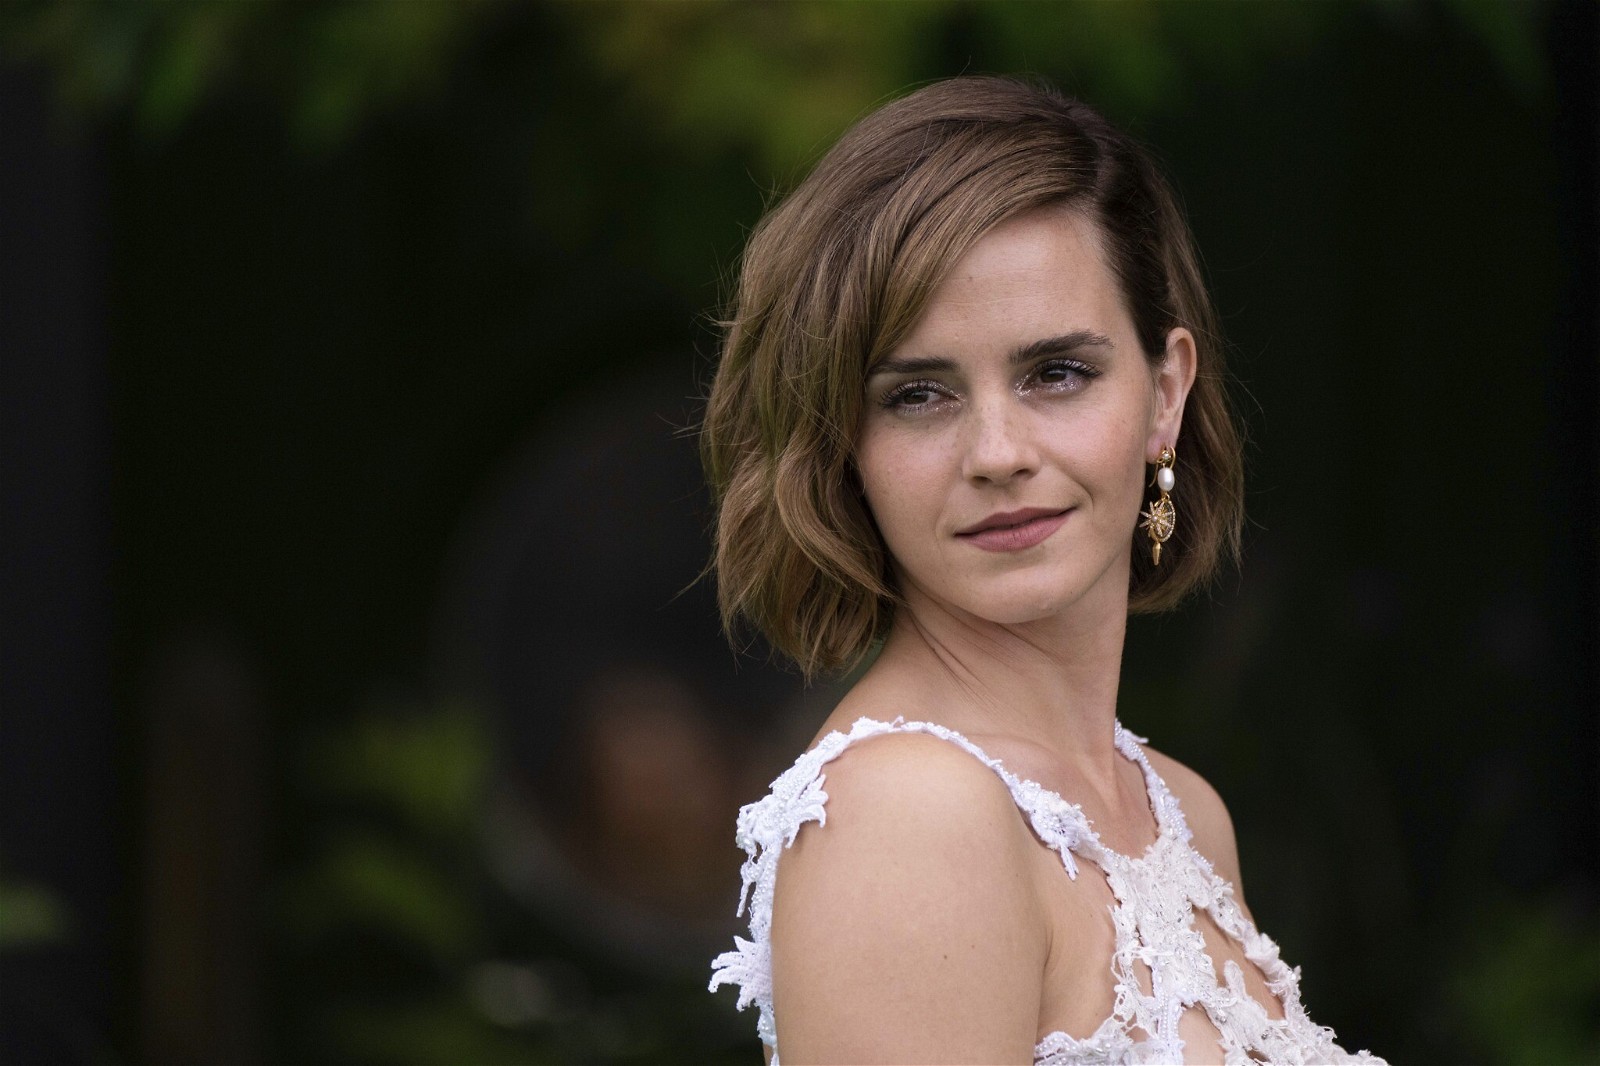 Nothing will be as hard as that”: Emma Watson Reveals Harry Potter Filming Prepared Her to Film Noah After Being Forced to Work While Sick